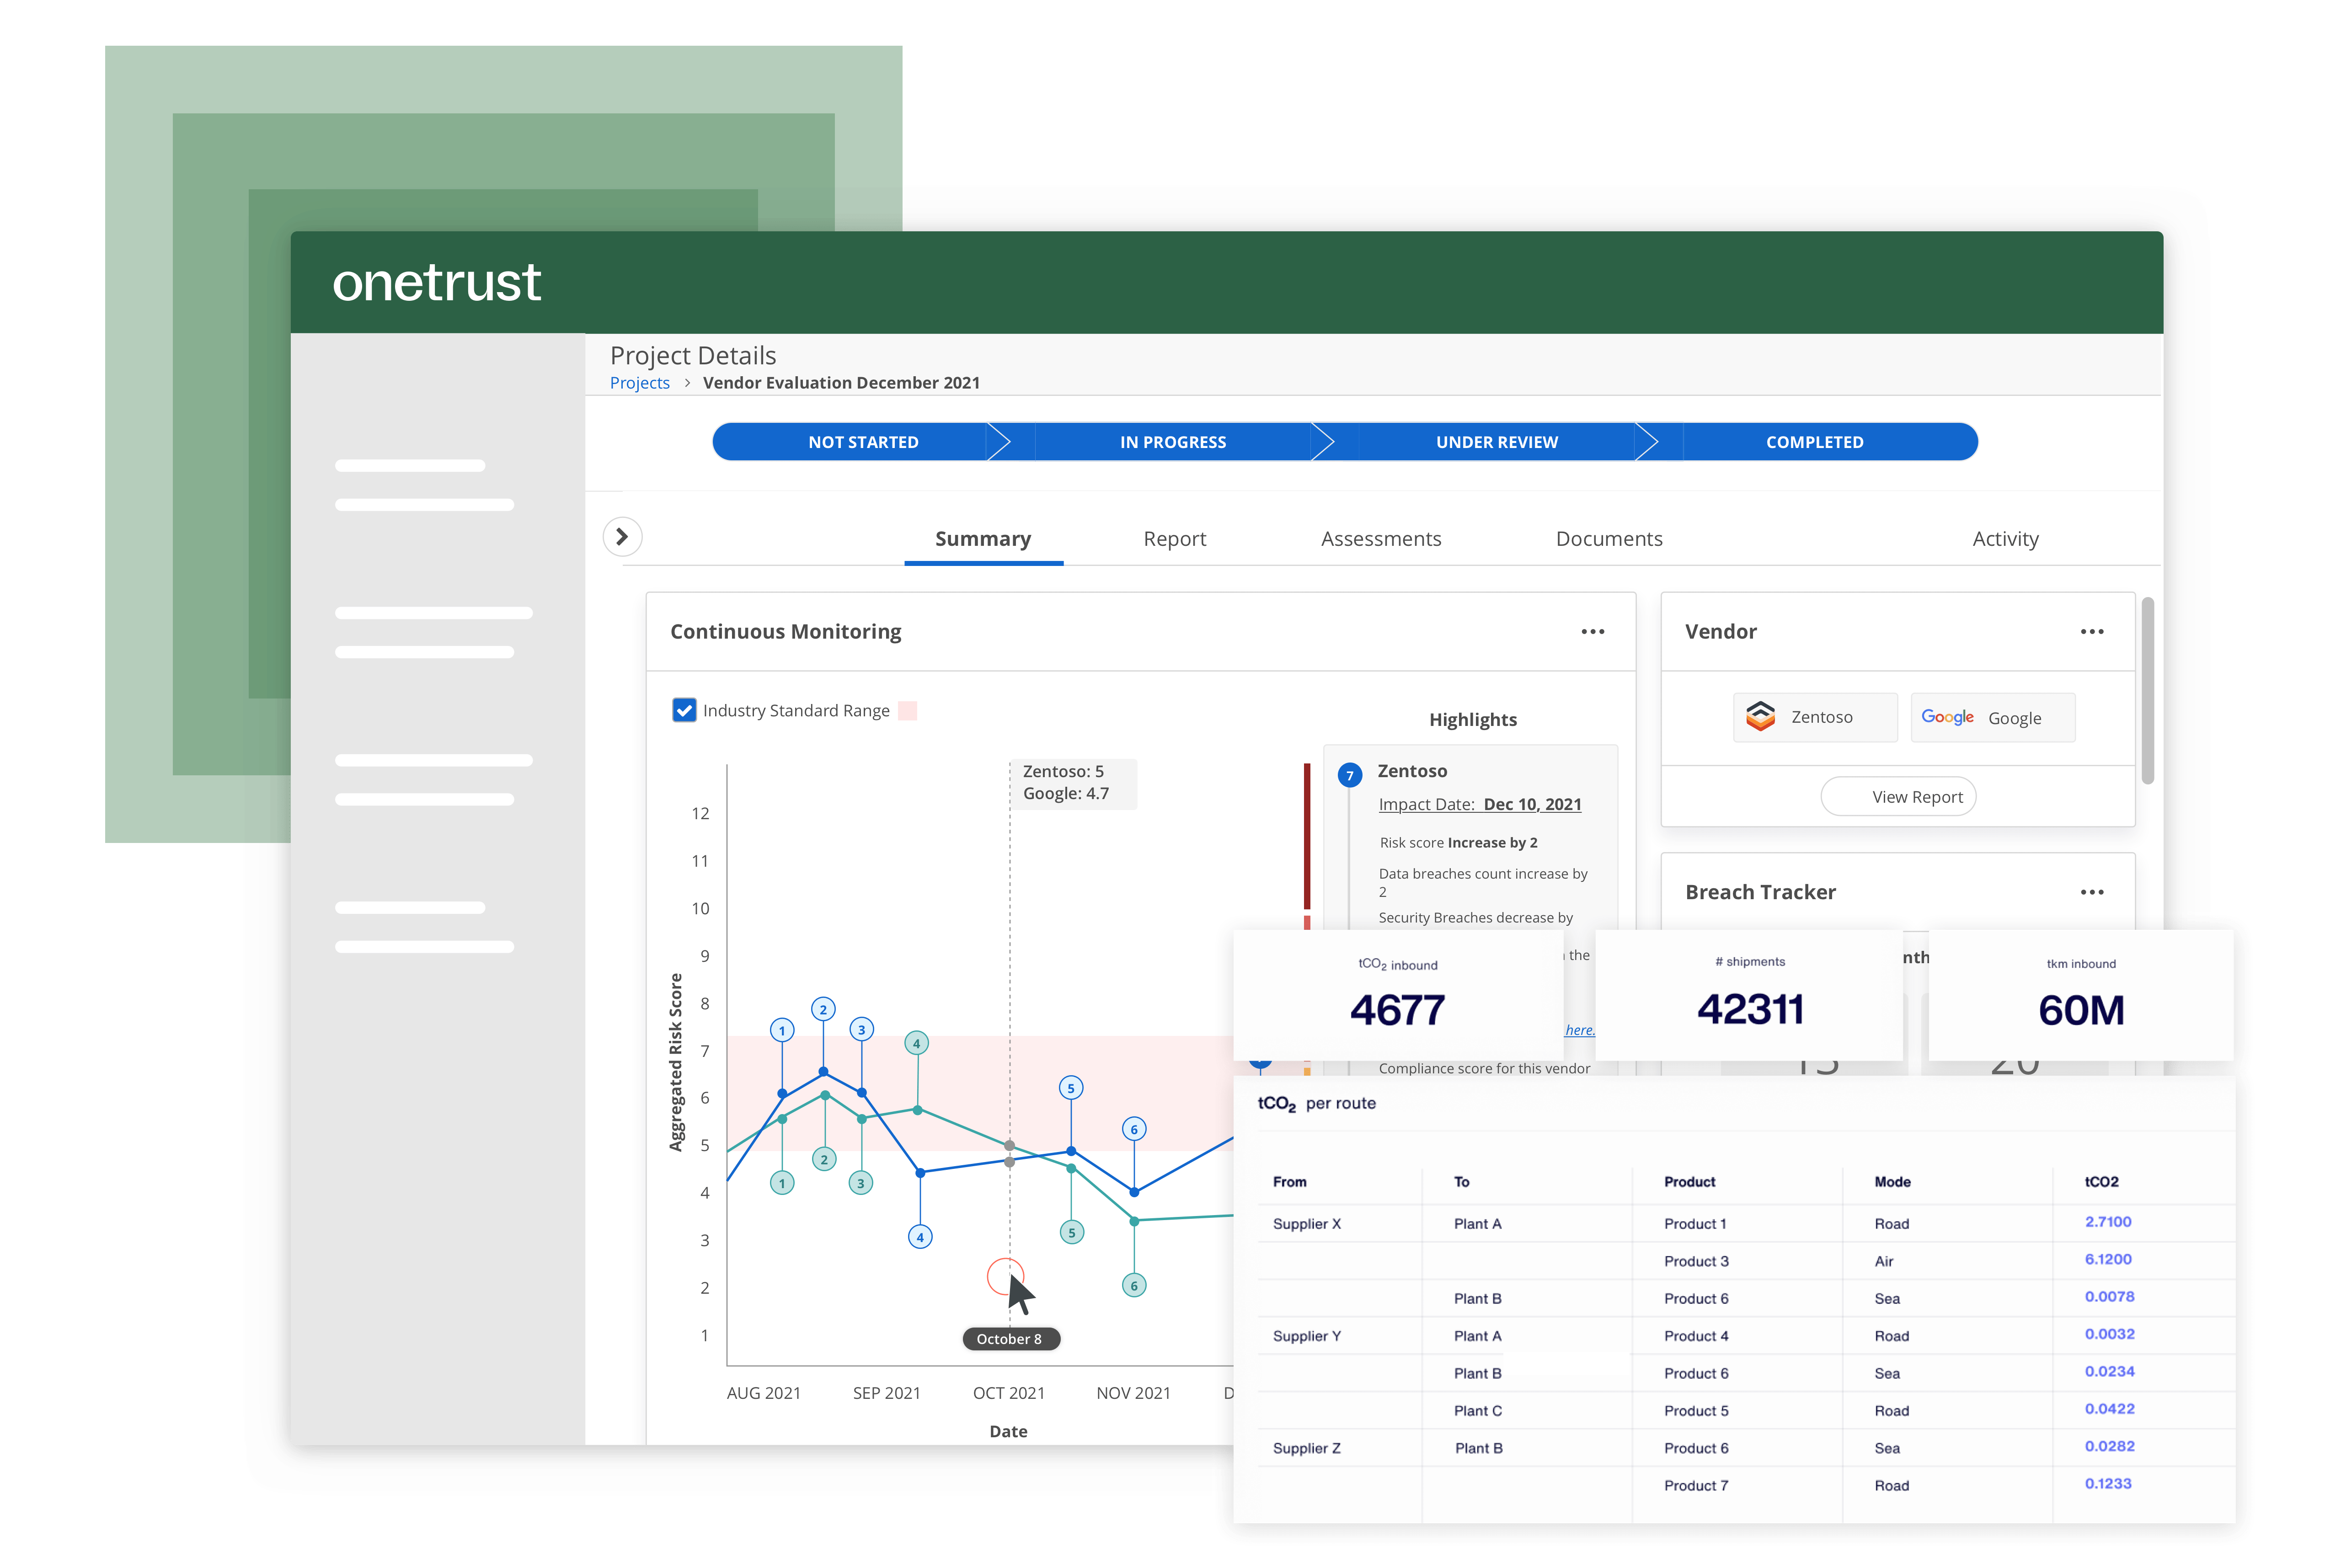 OneTrust screens from the Supplier Sustainability and Responsibility module that shows vendor monitoring, associated data through line charts, and the emissions recorded over time.